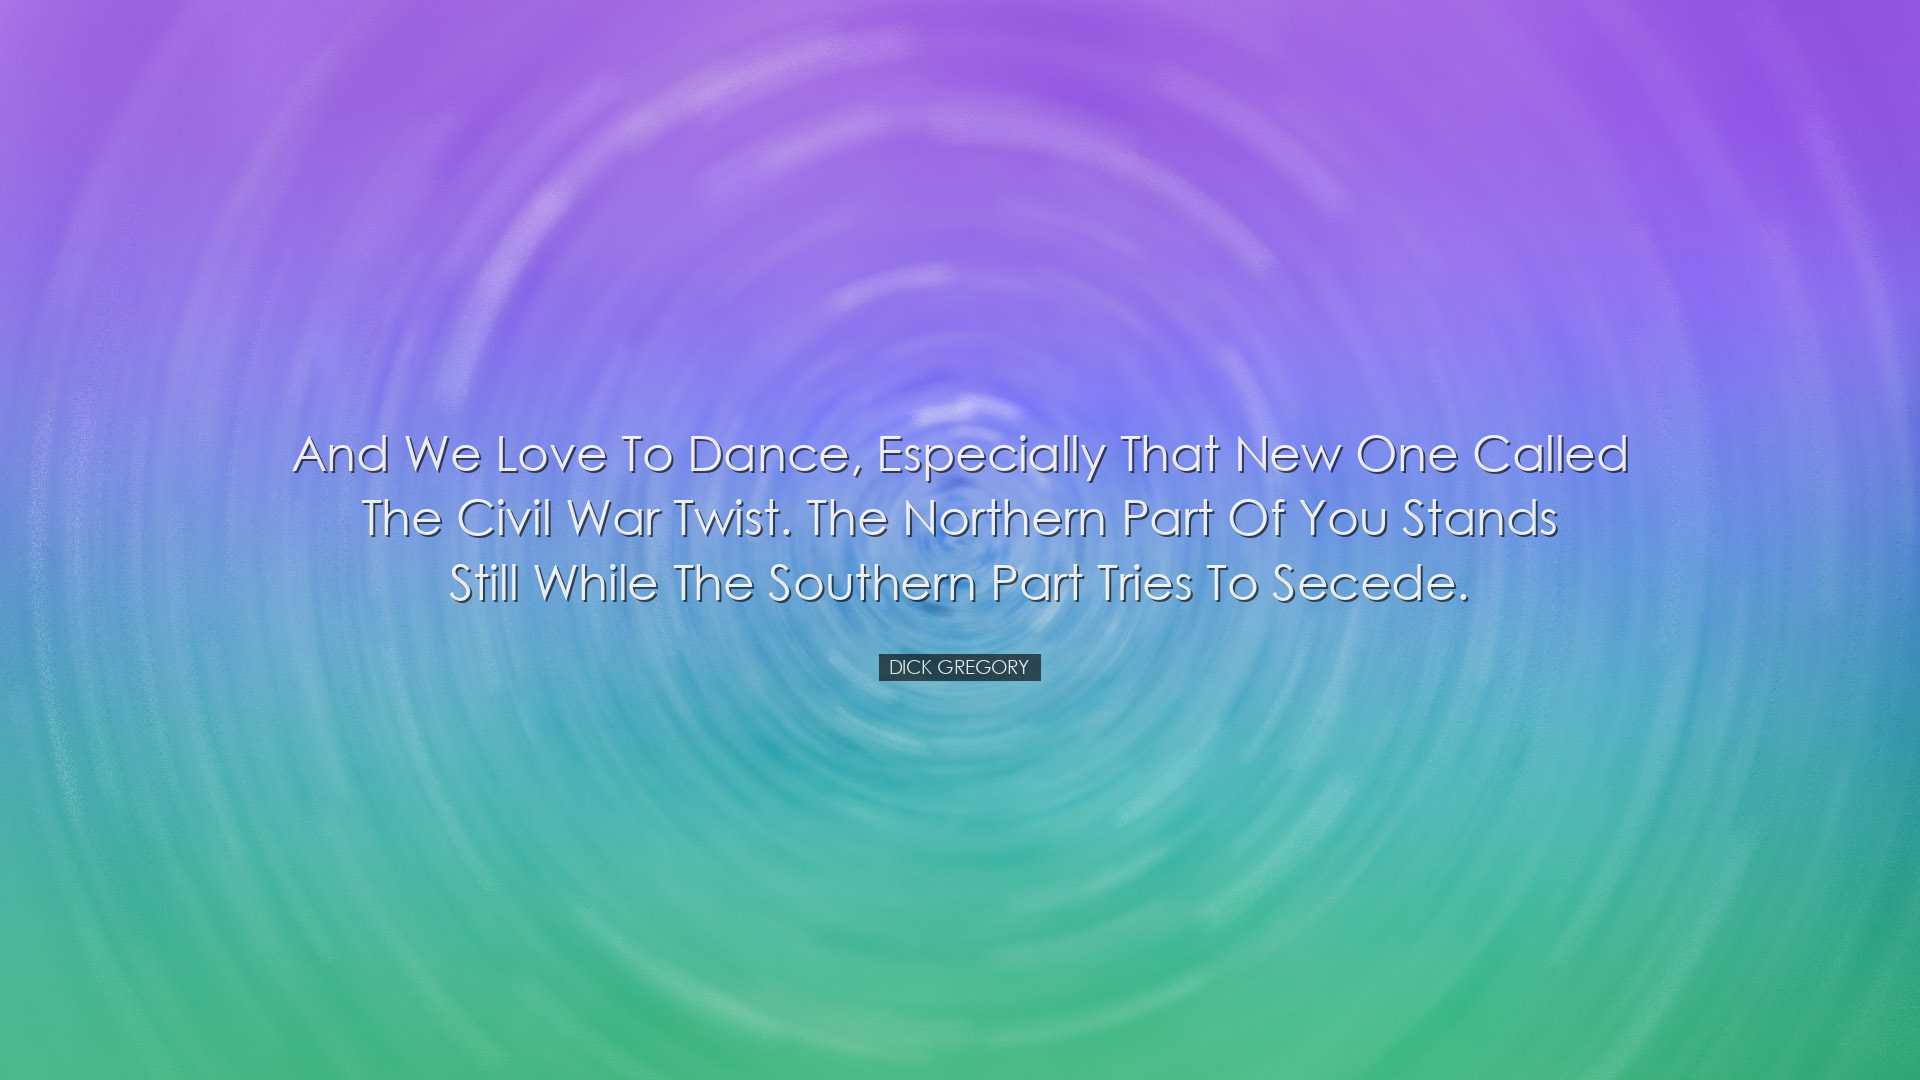 And we love to dance, especially that new one called the Civil War